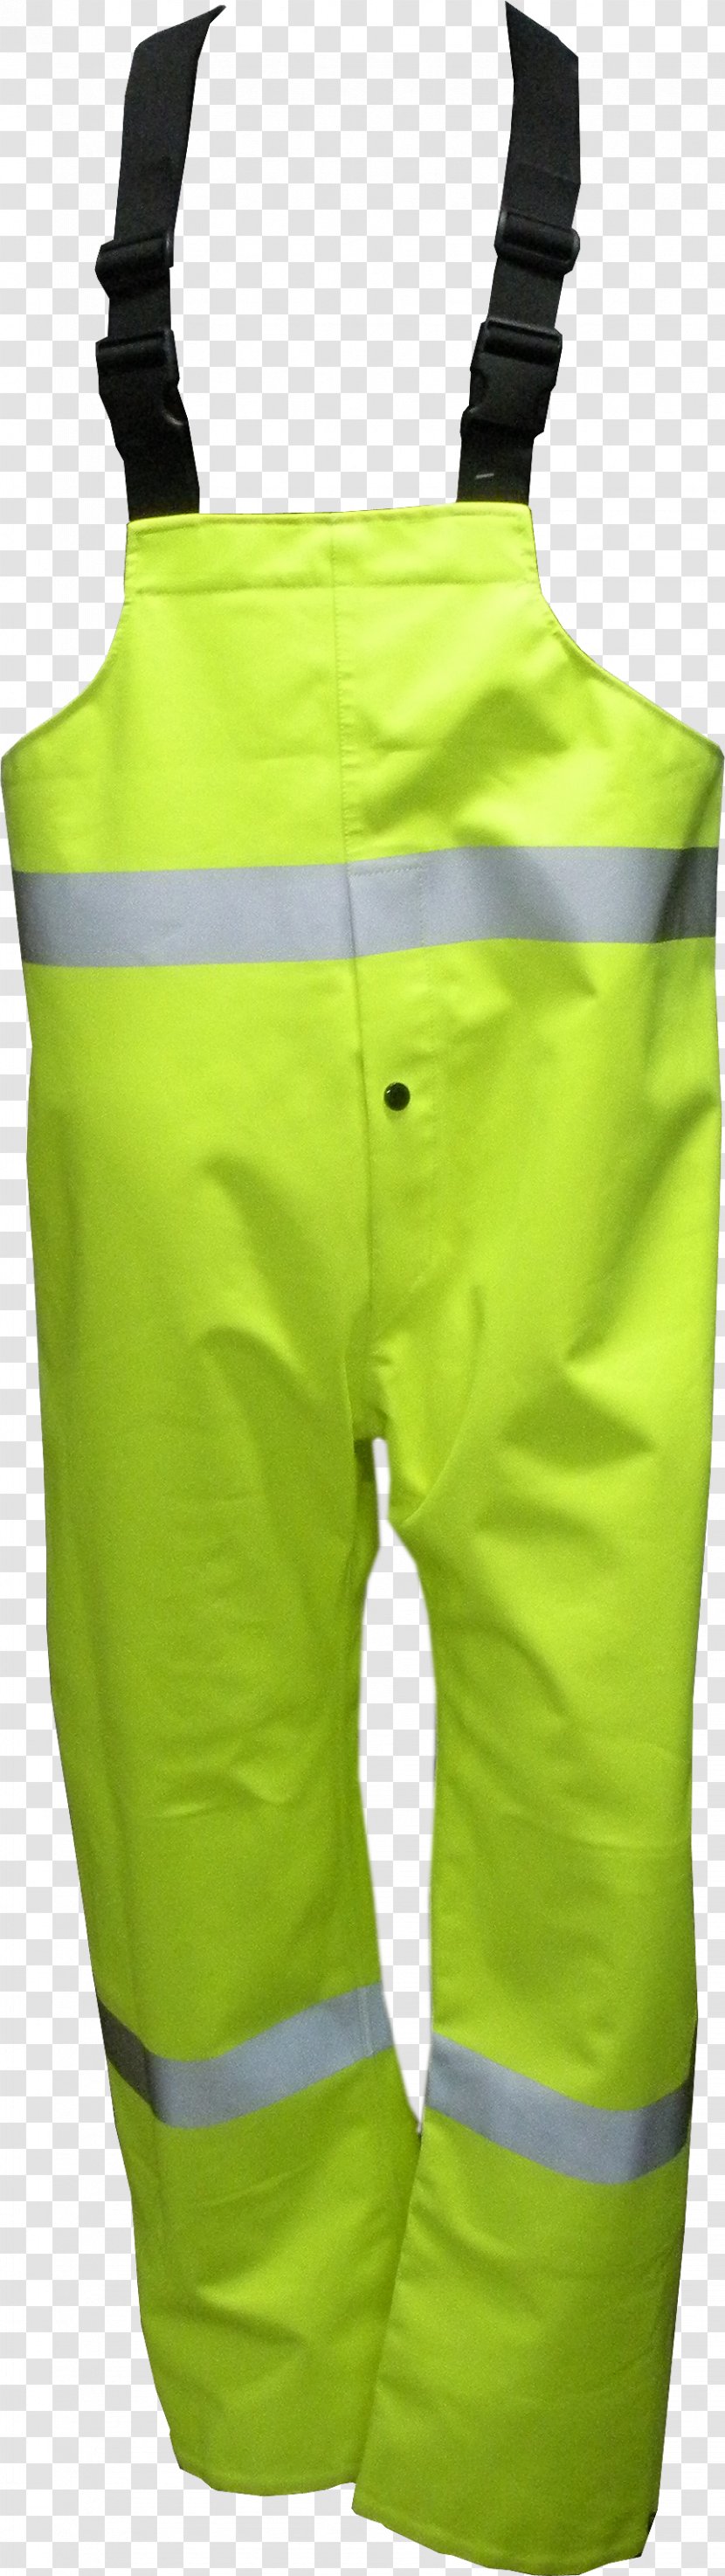 Bib Jacket Pants Personal Protective Equipment Clothing - Overall Transparent PNG